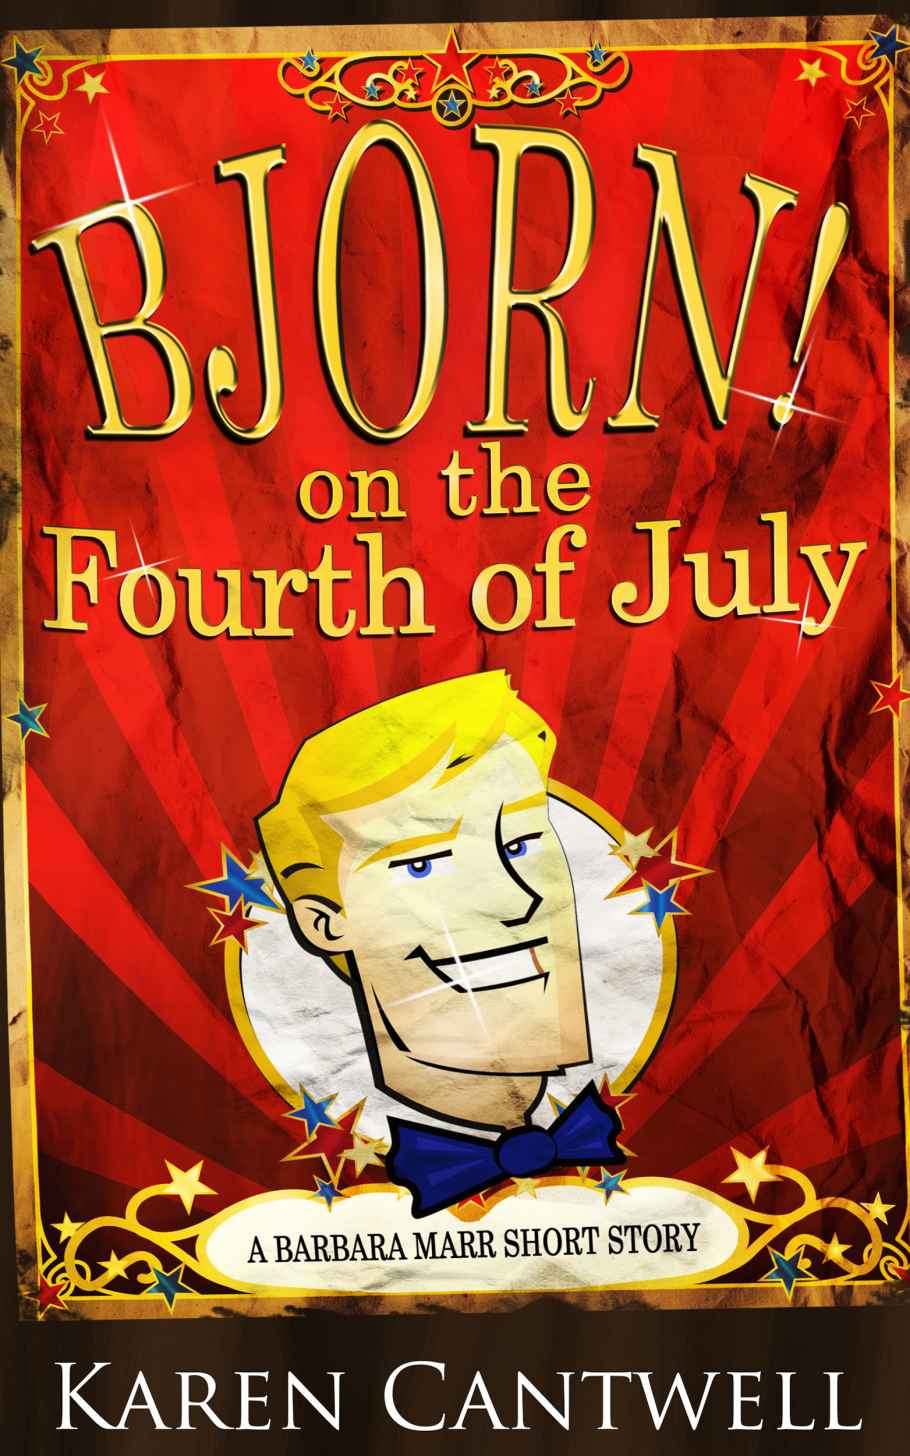 bjorn-on-the-fourth-of-july-a-barbara-marr-short-story-read-online